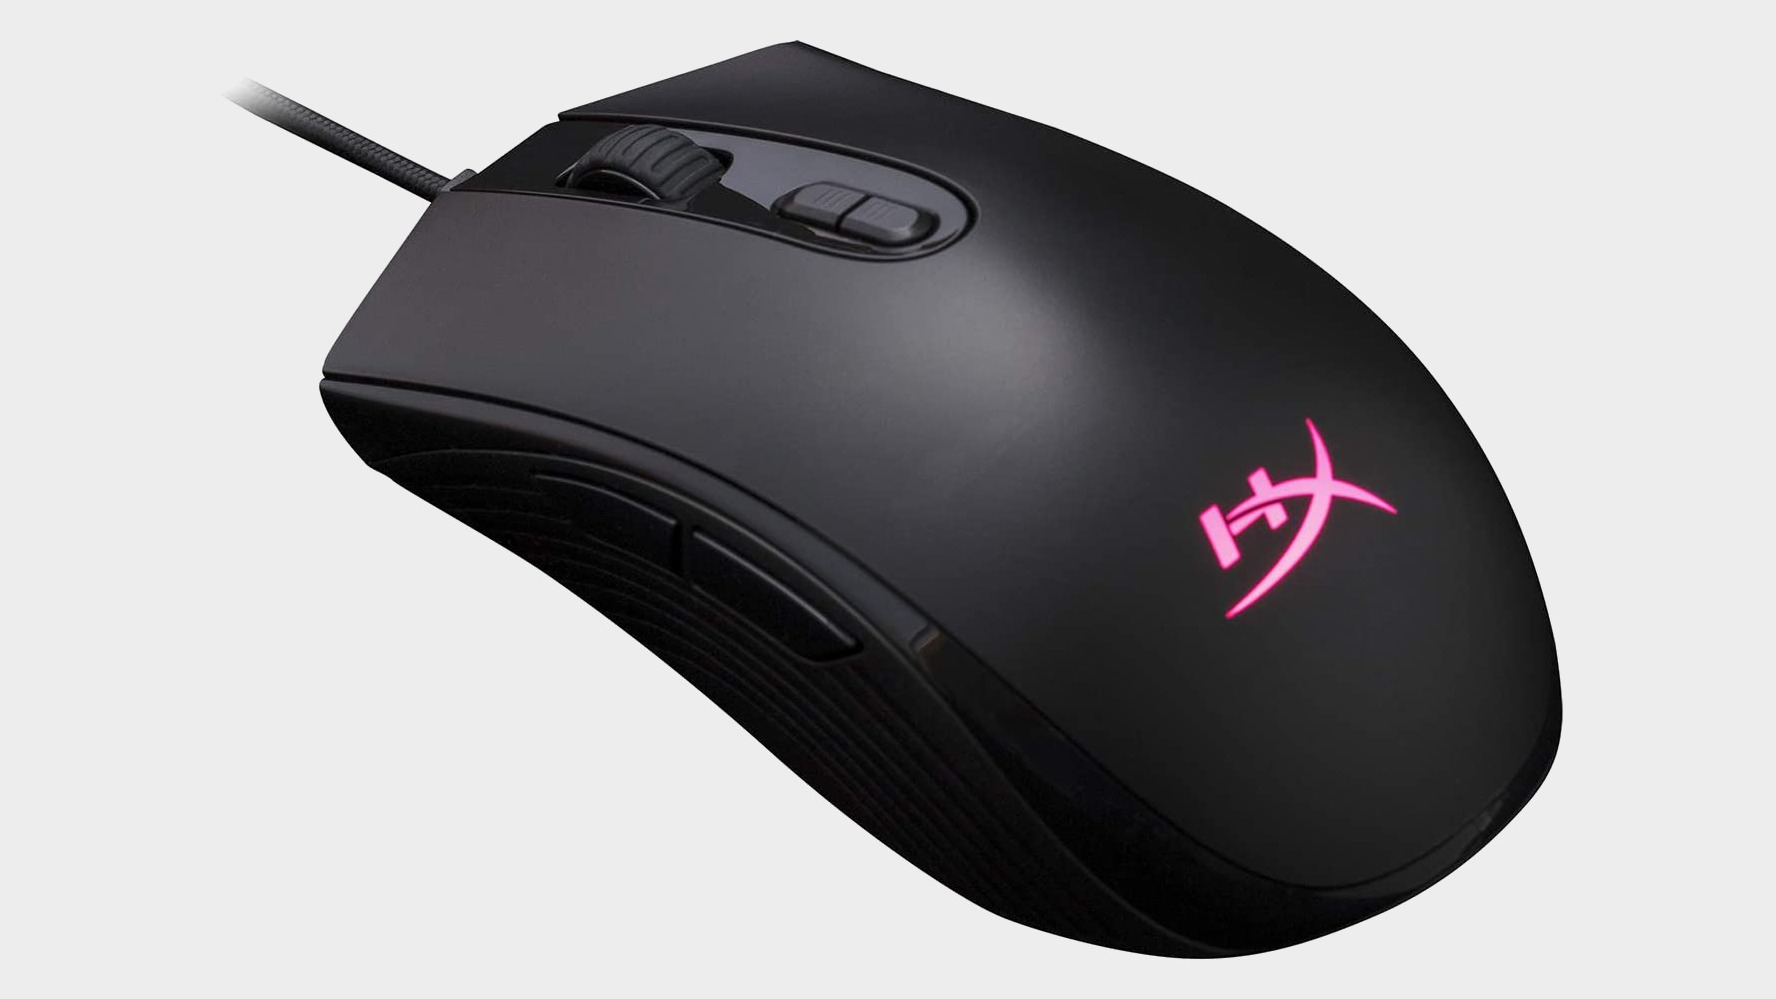  Grab a HyperX Pulsefire Core gaming mouse for $20 today only 